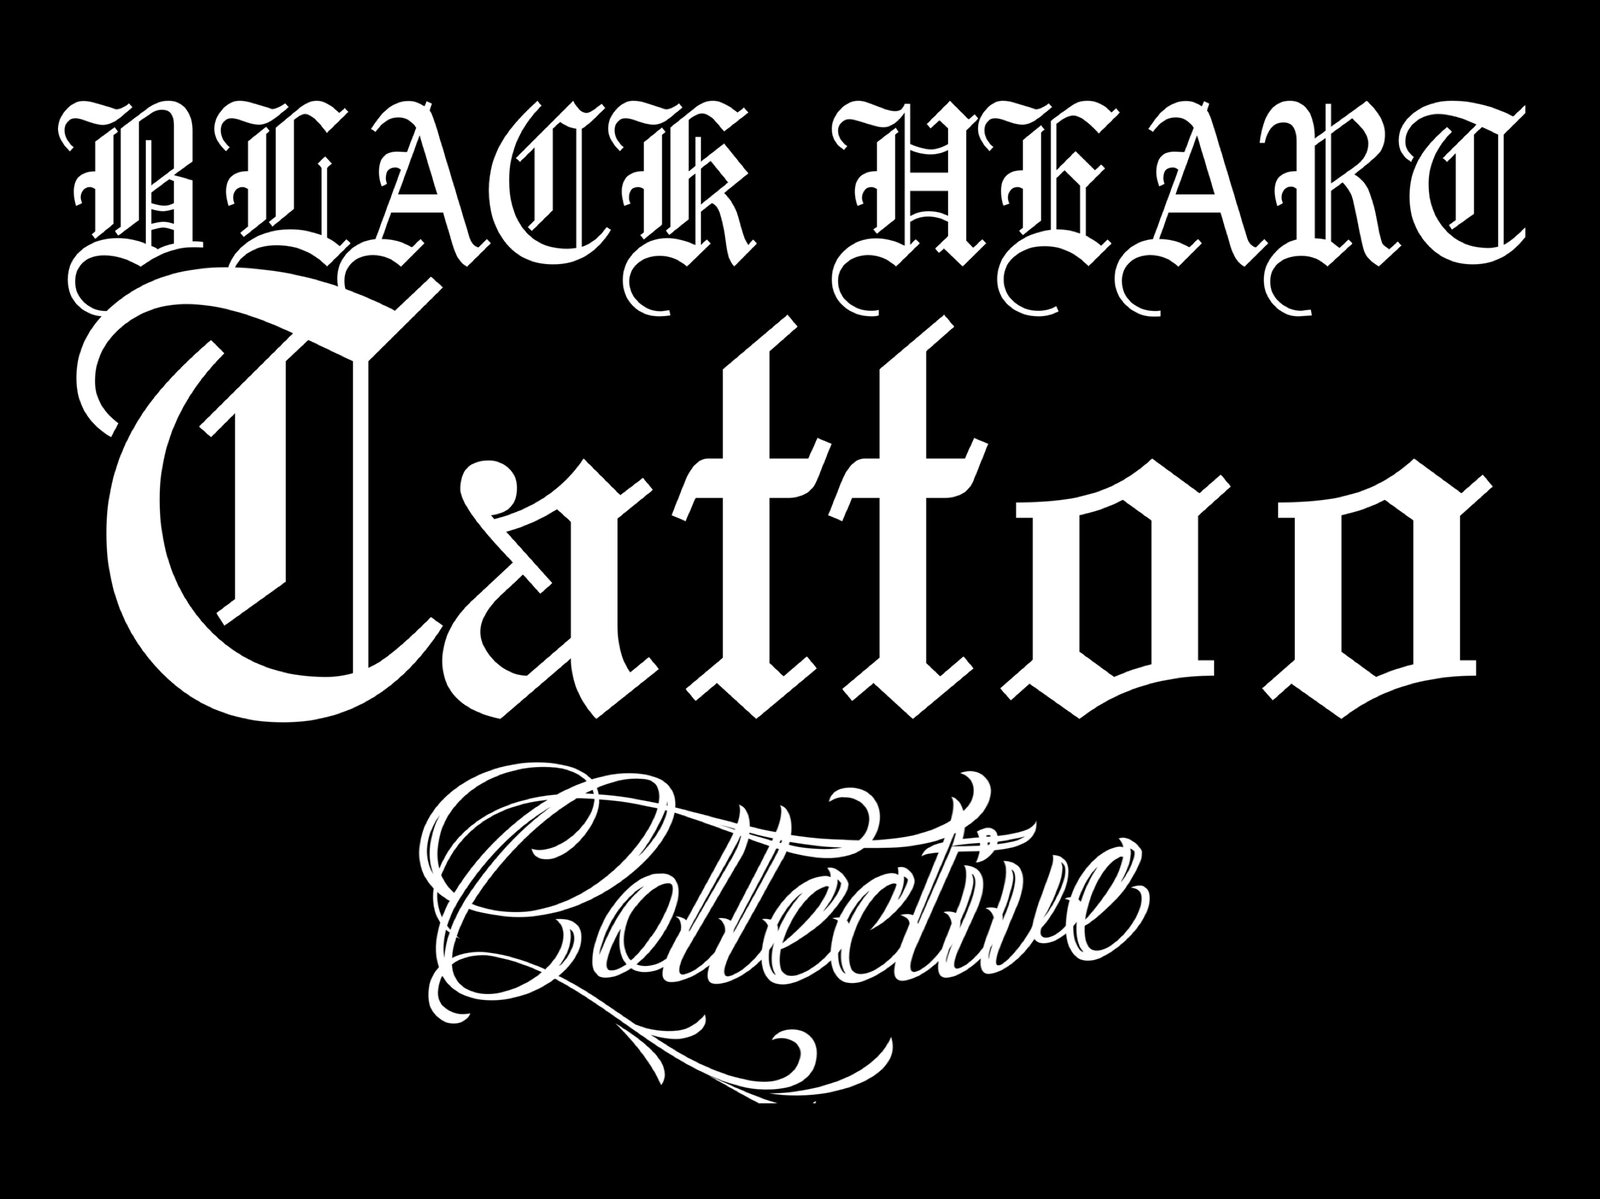 BLACK HEART COLLECTIVE